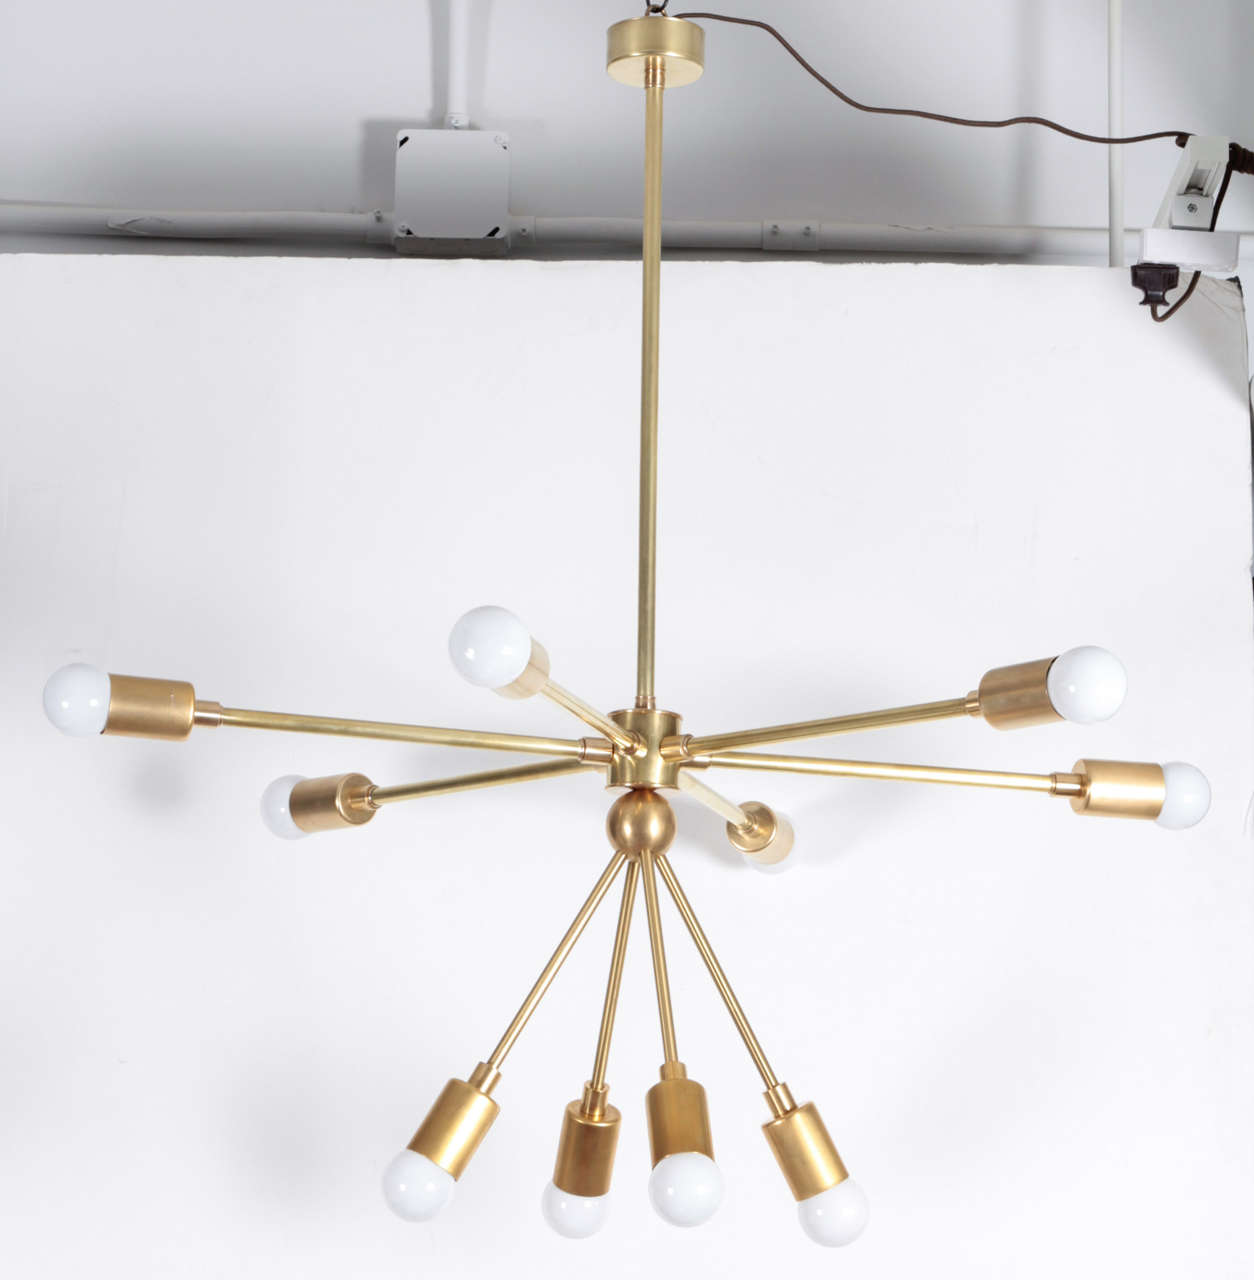 The Macomber Sputnik-style light fixture. USA, new production. Features six horizontal arms and four downward arms. Polished brass. This is a custom item; available ready made in dimensions provided below or as a custom piece with 2 to 4 week